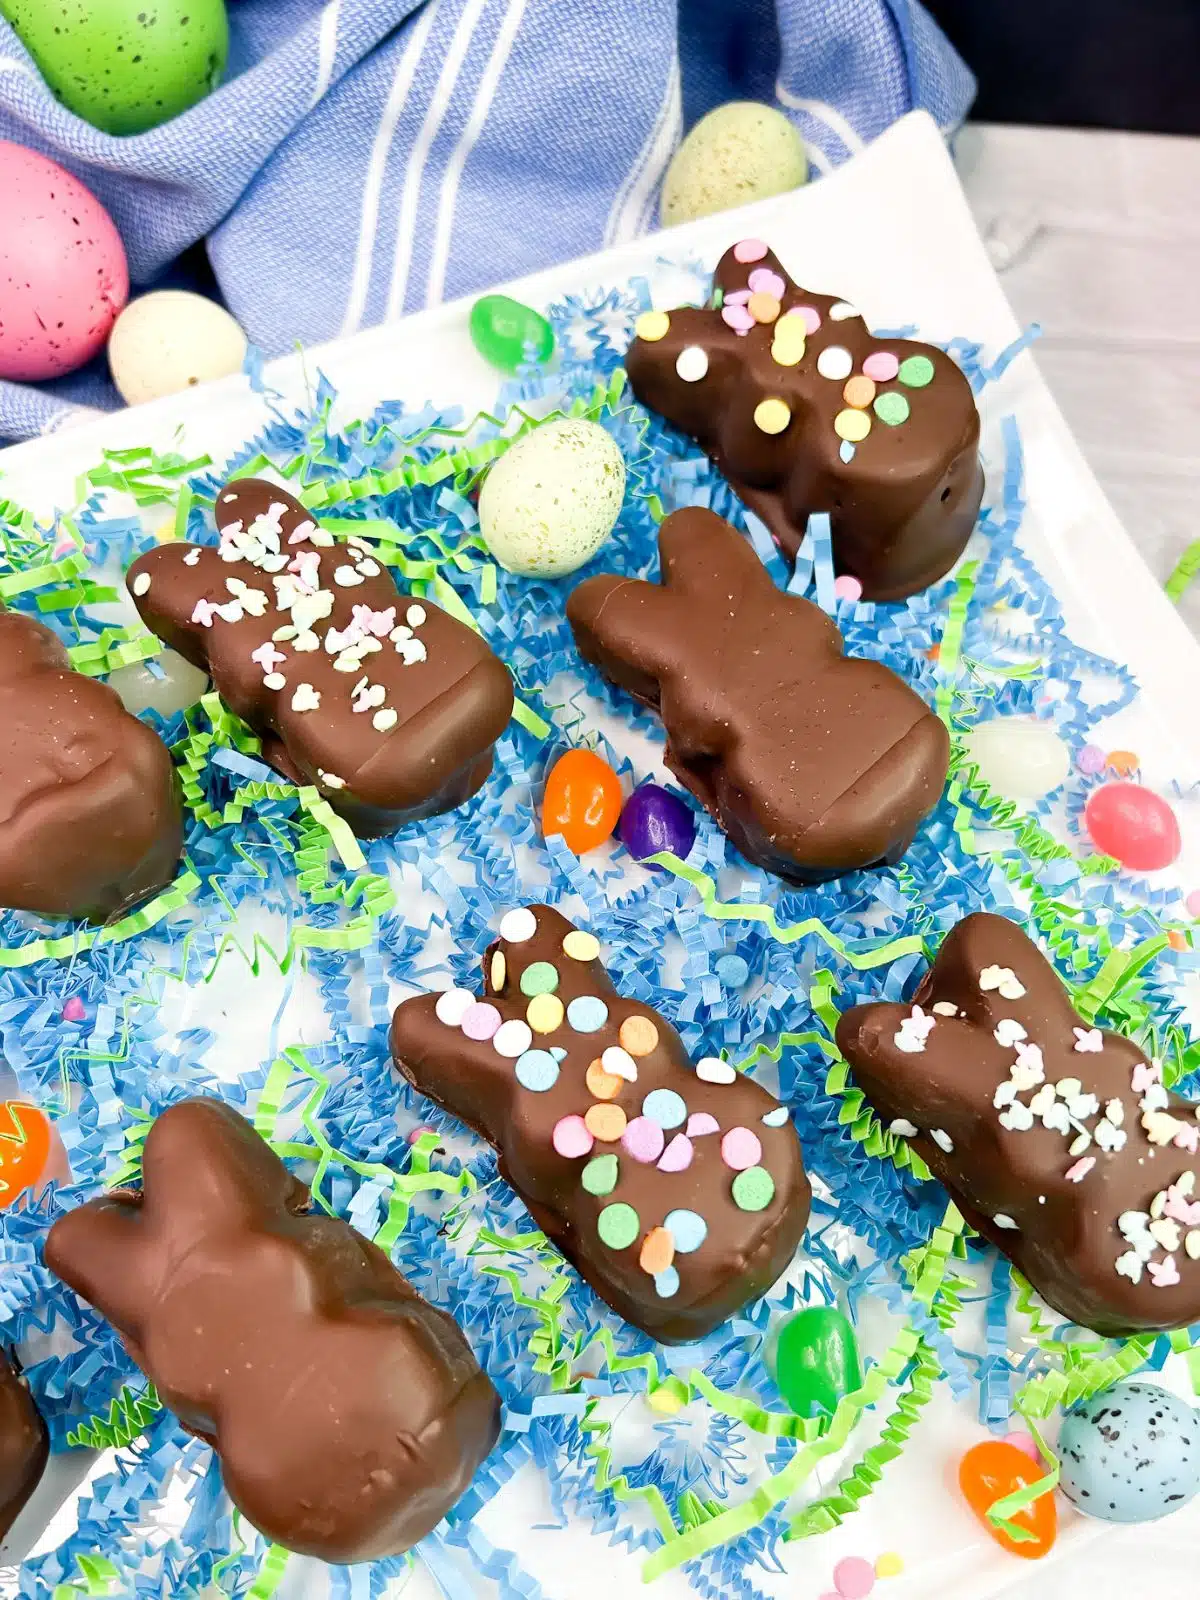 chocolate dipped marshmallow bunny Peeps on plate with jelly beans and plastic eggs.